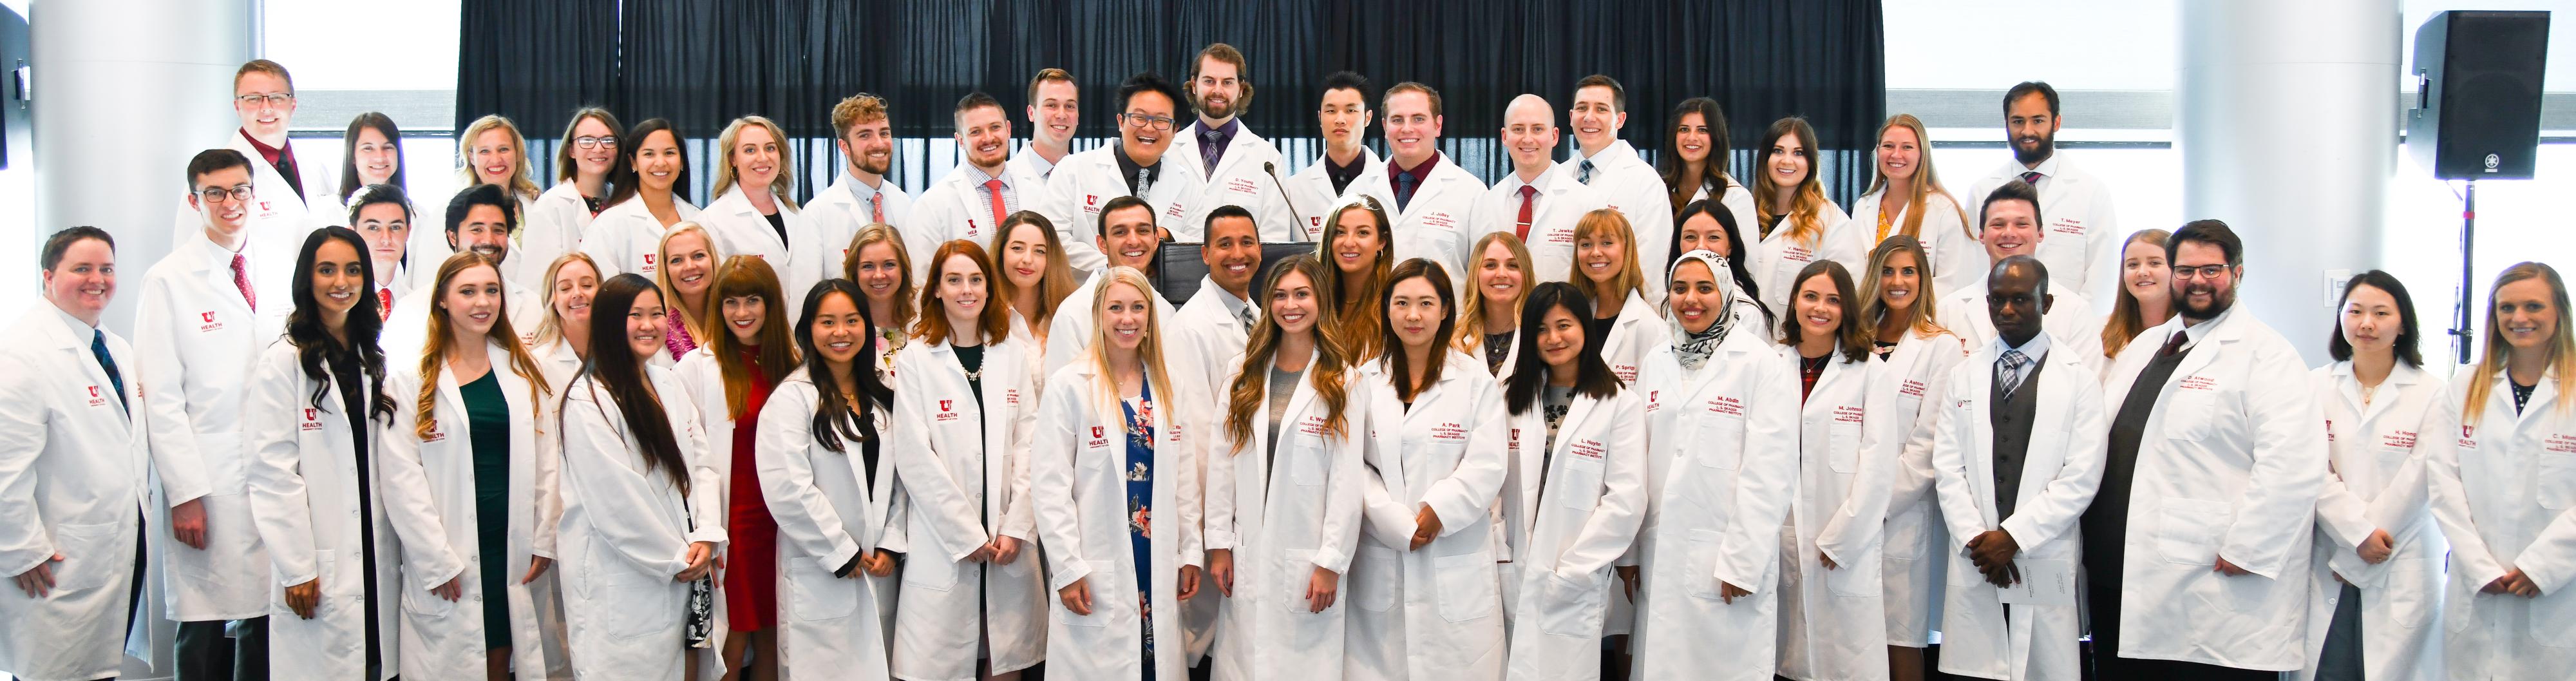 student group in white coats